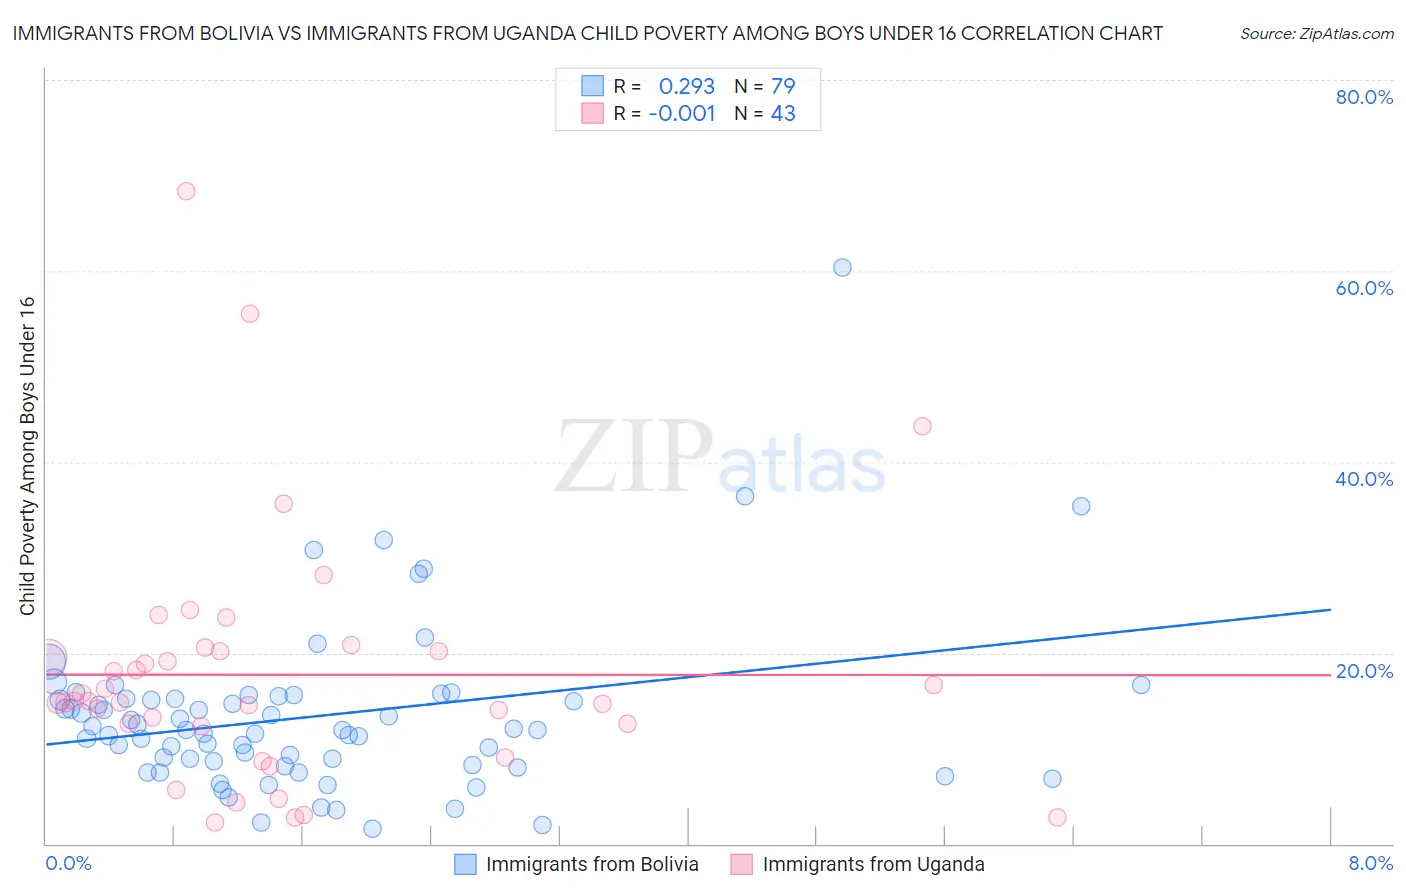 Immigrants from Bolivia vs Immigrants from Uganda Child Poverty Among Boys Under 16